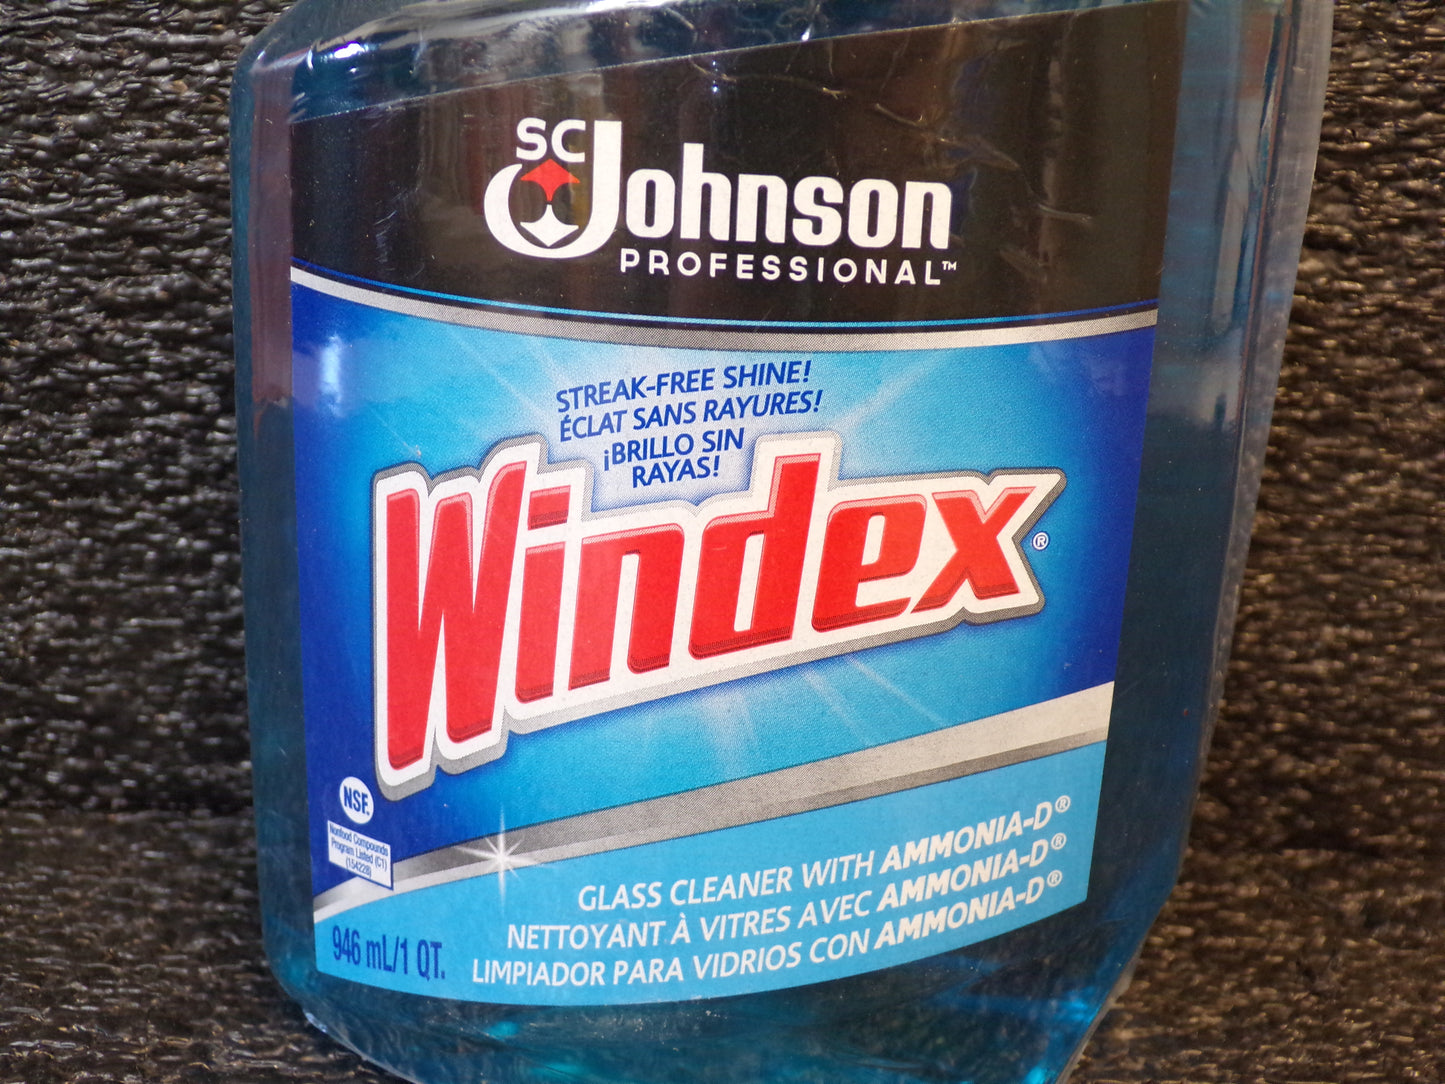 Windex 32 oz Glass Cleaner with Ammonia-D Capped with Trigger (CR00018-K02)